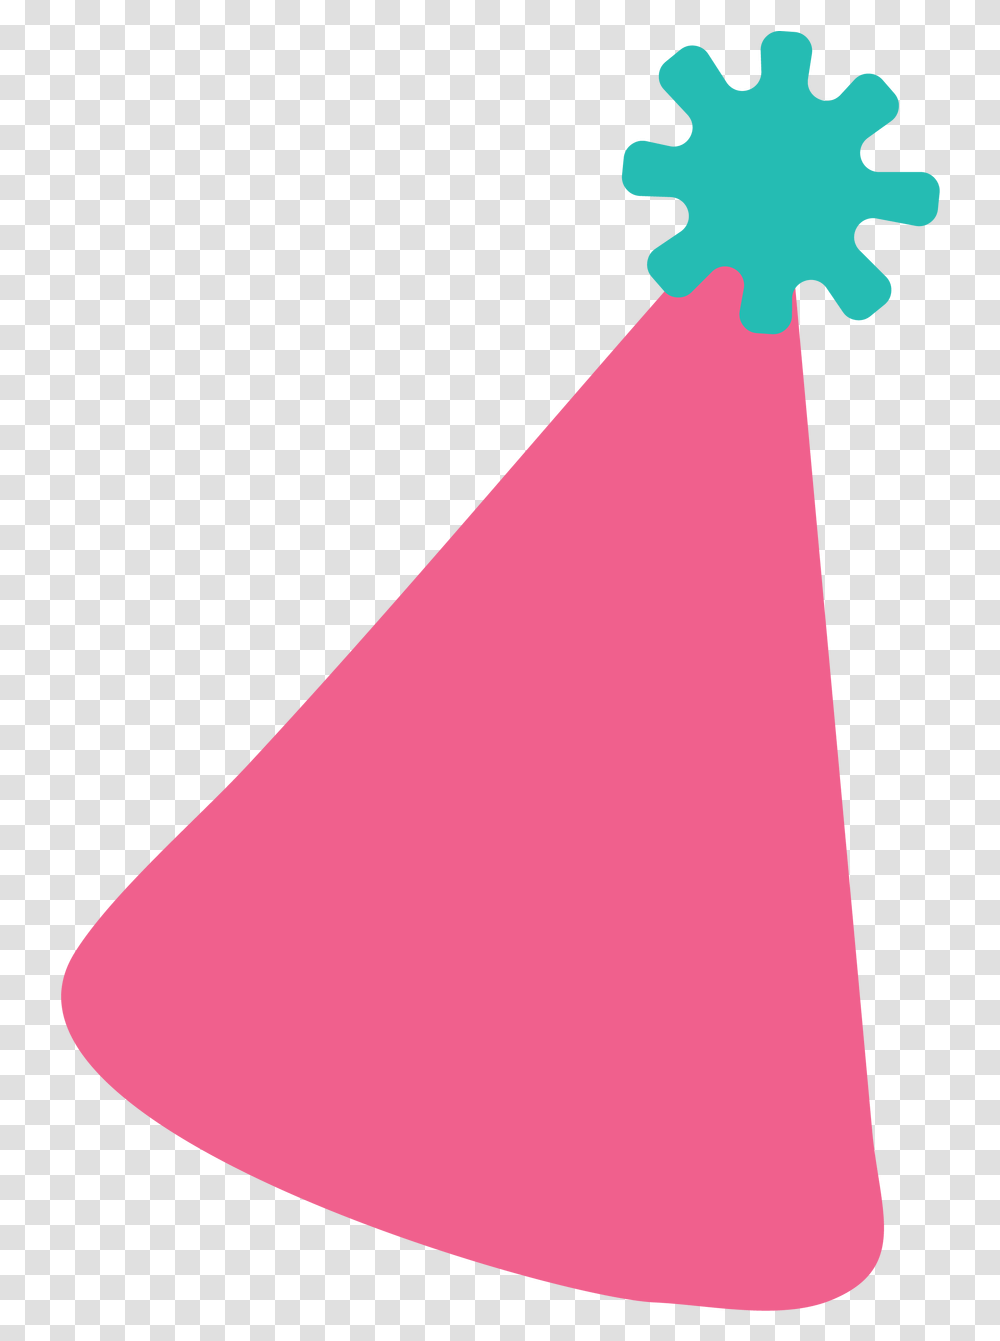 Party Hat Svg Cut File Party Hat Cut Out, Clothing, Apparel, Cone, Triangle Transparent Png